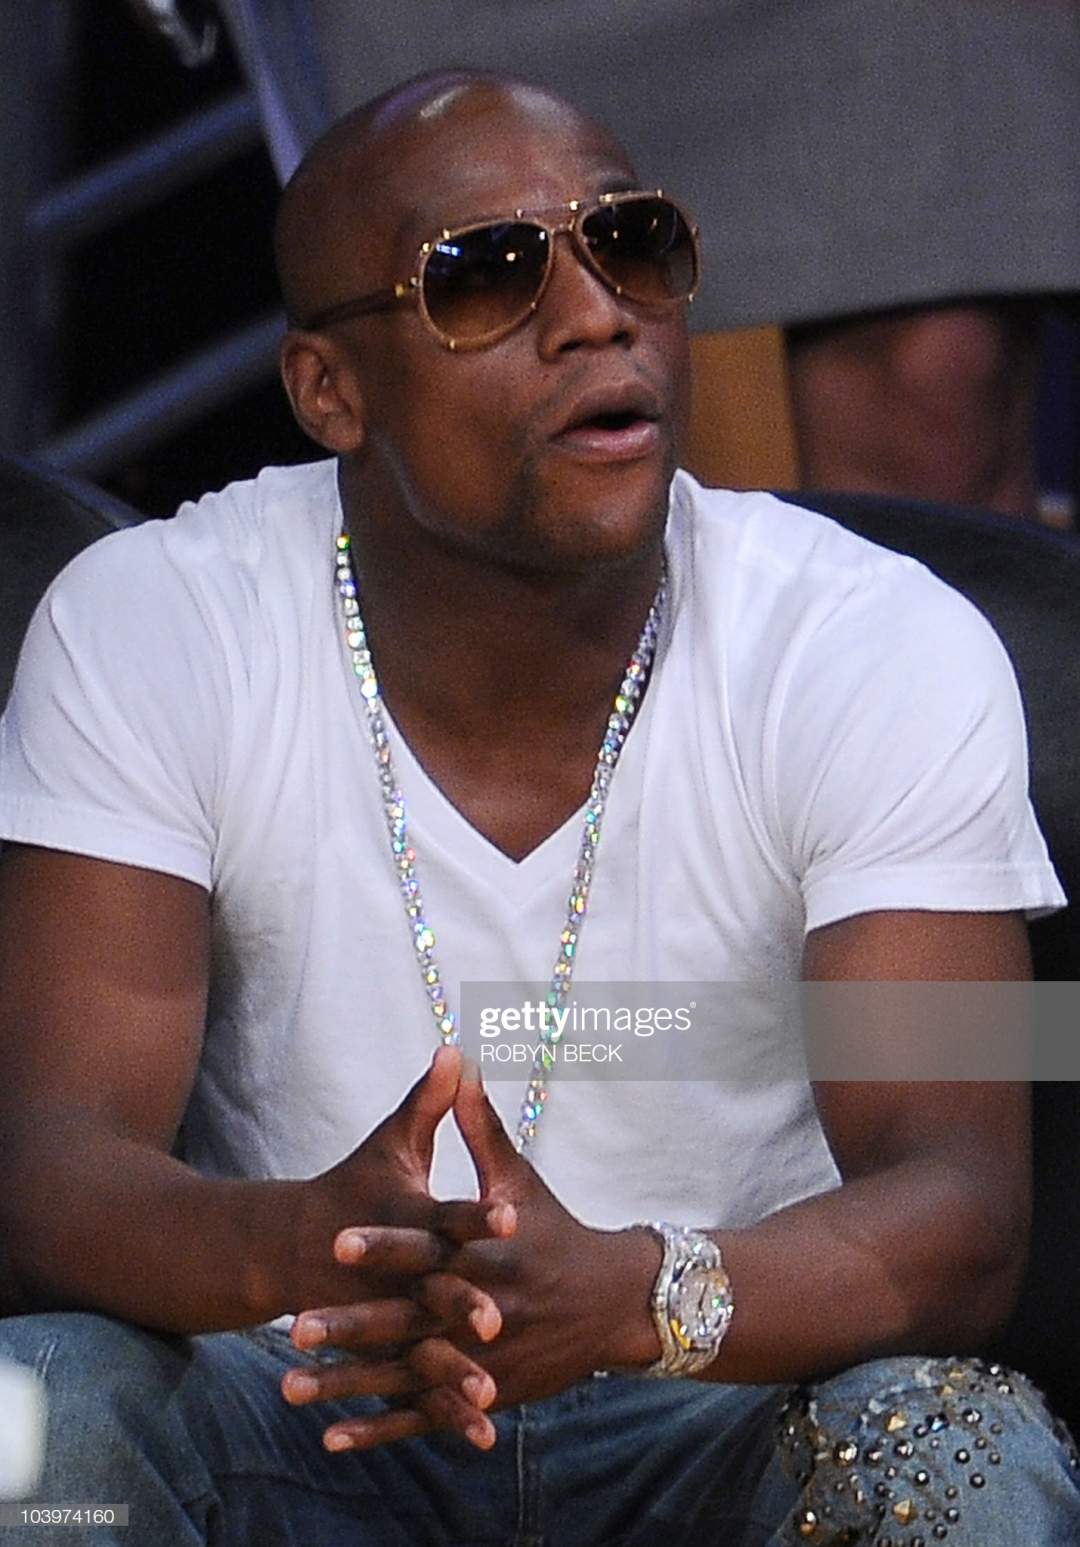 Floyd Mayweather ex-lover and mother of 3 children found dead in her car (see details)